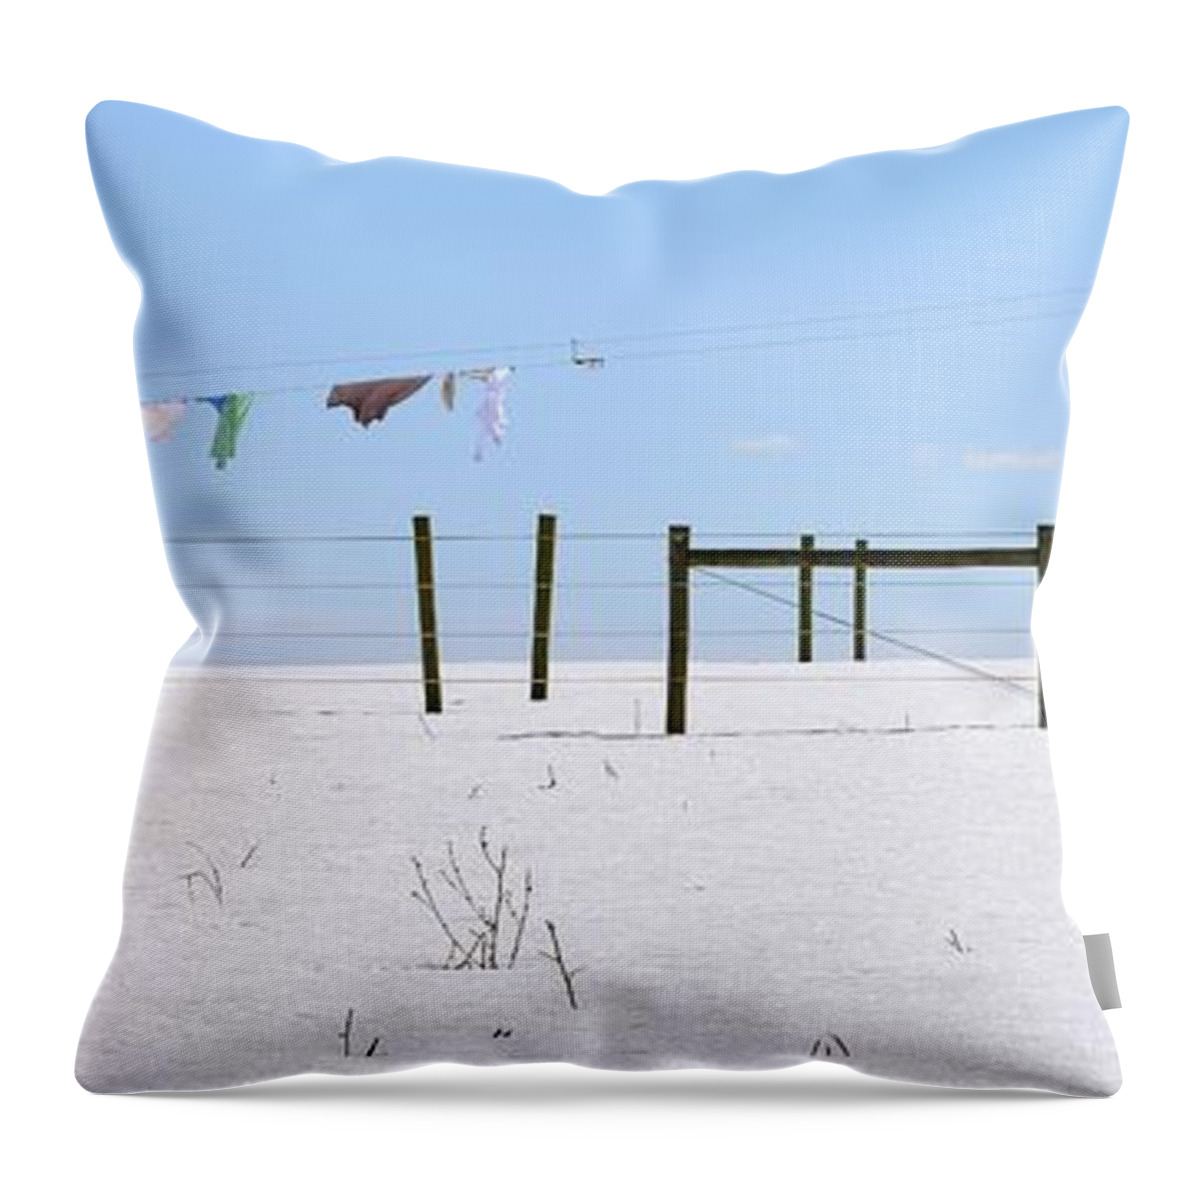 Amish Throw Pillow featuring the photograph Amish Laundry Over Snow by Tana Reiff